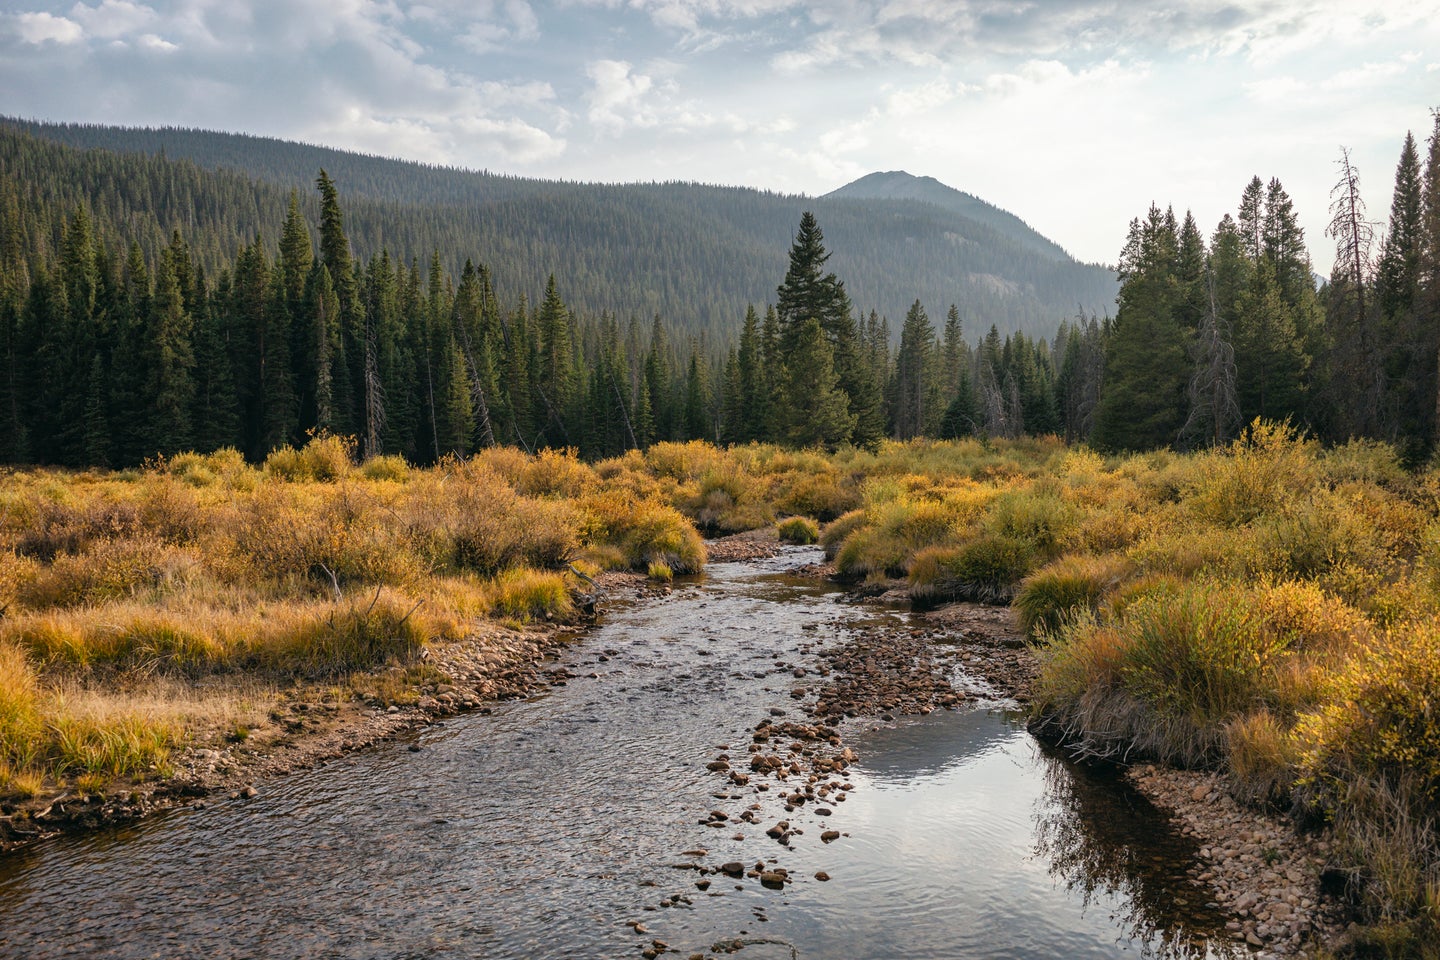 Creek running through yellow meadows and mountains in the Colorado basin